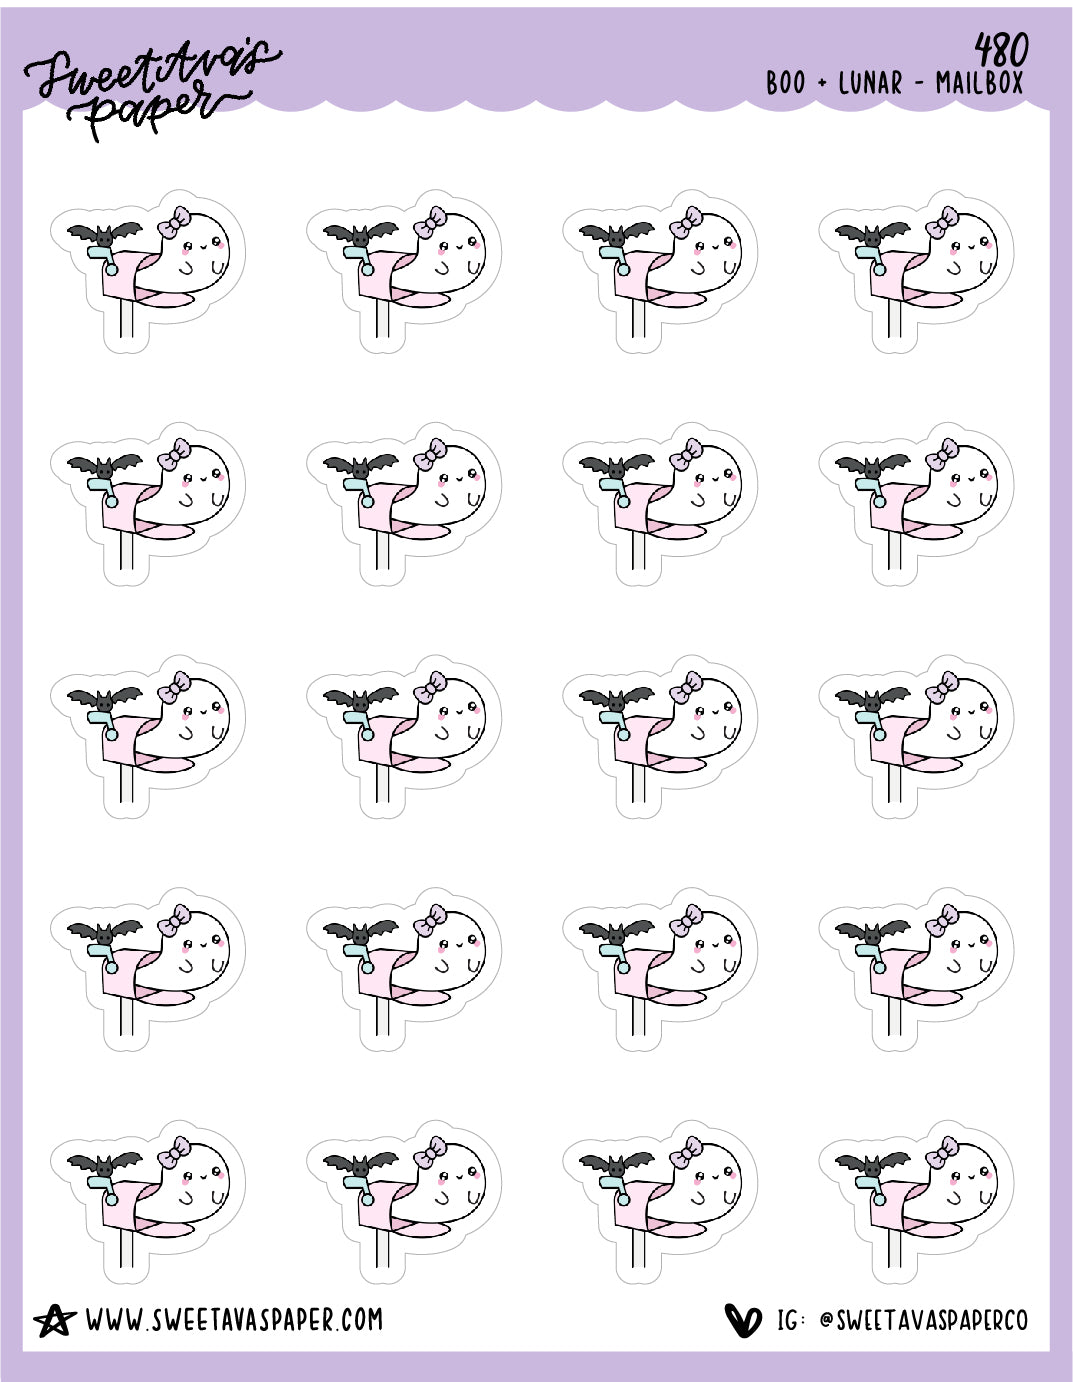 Mailbox Planner Stickers - Boo and Lunar [480]